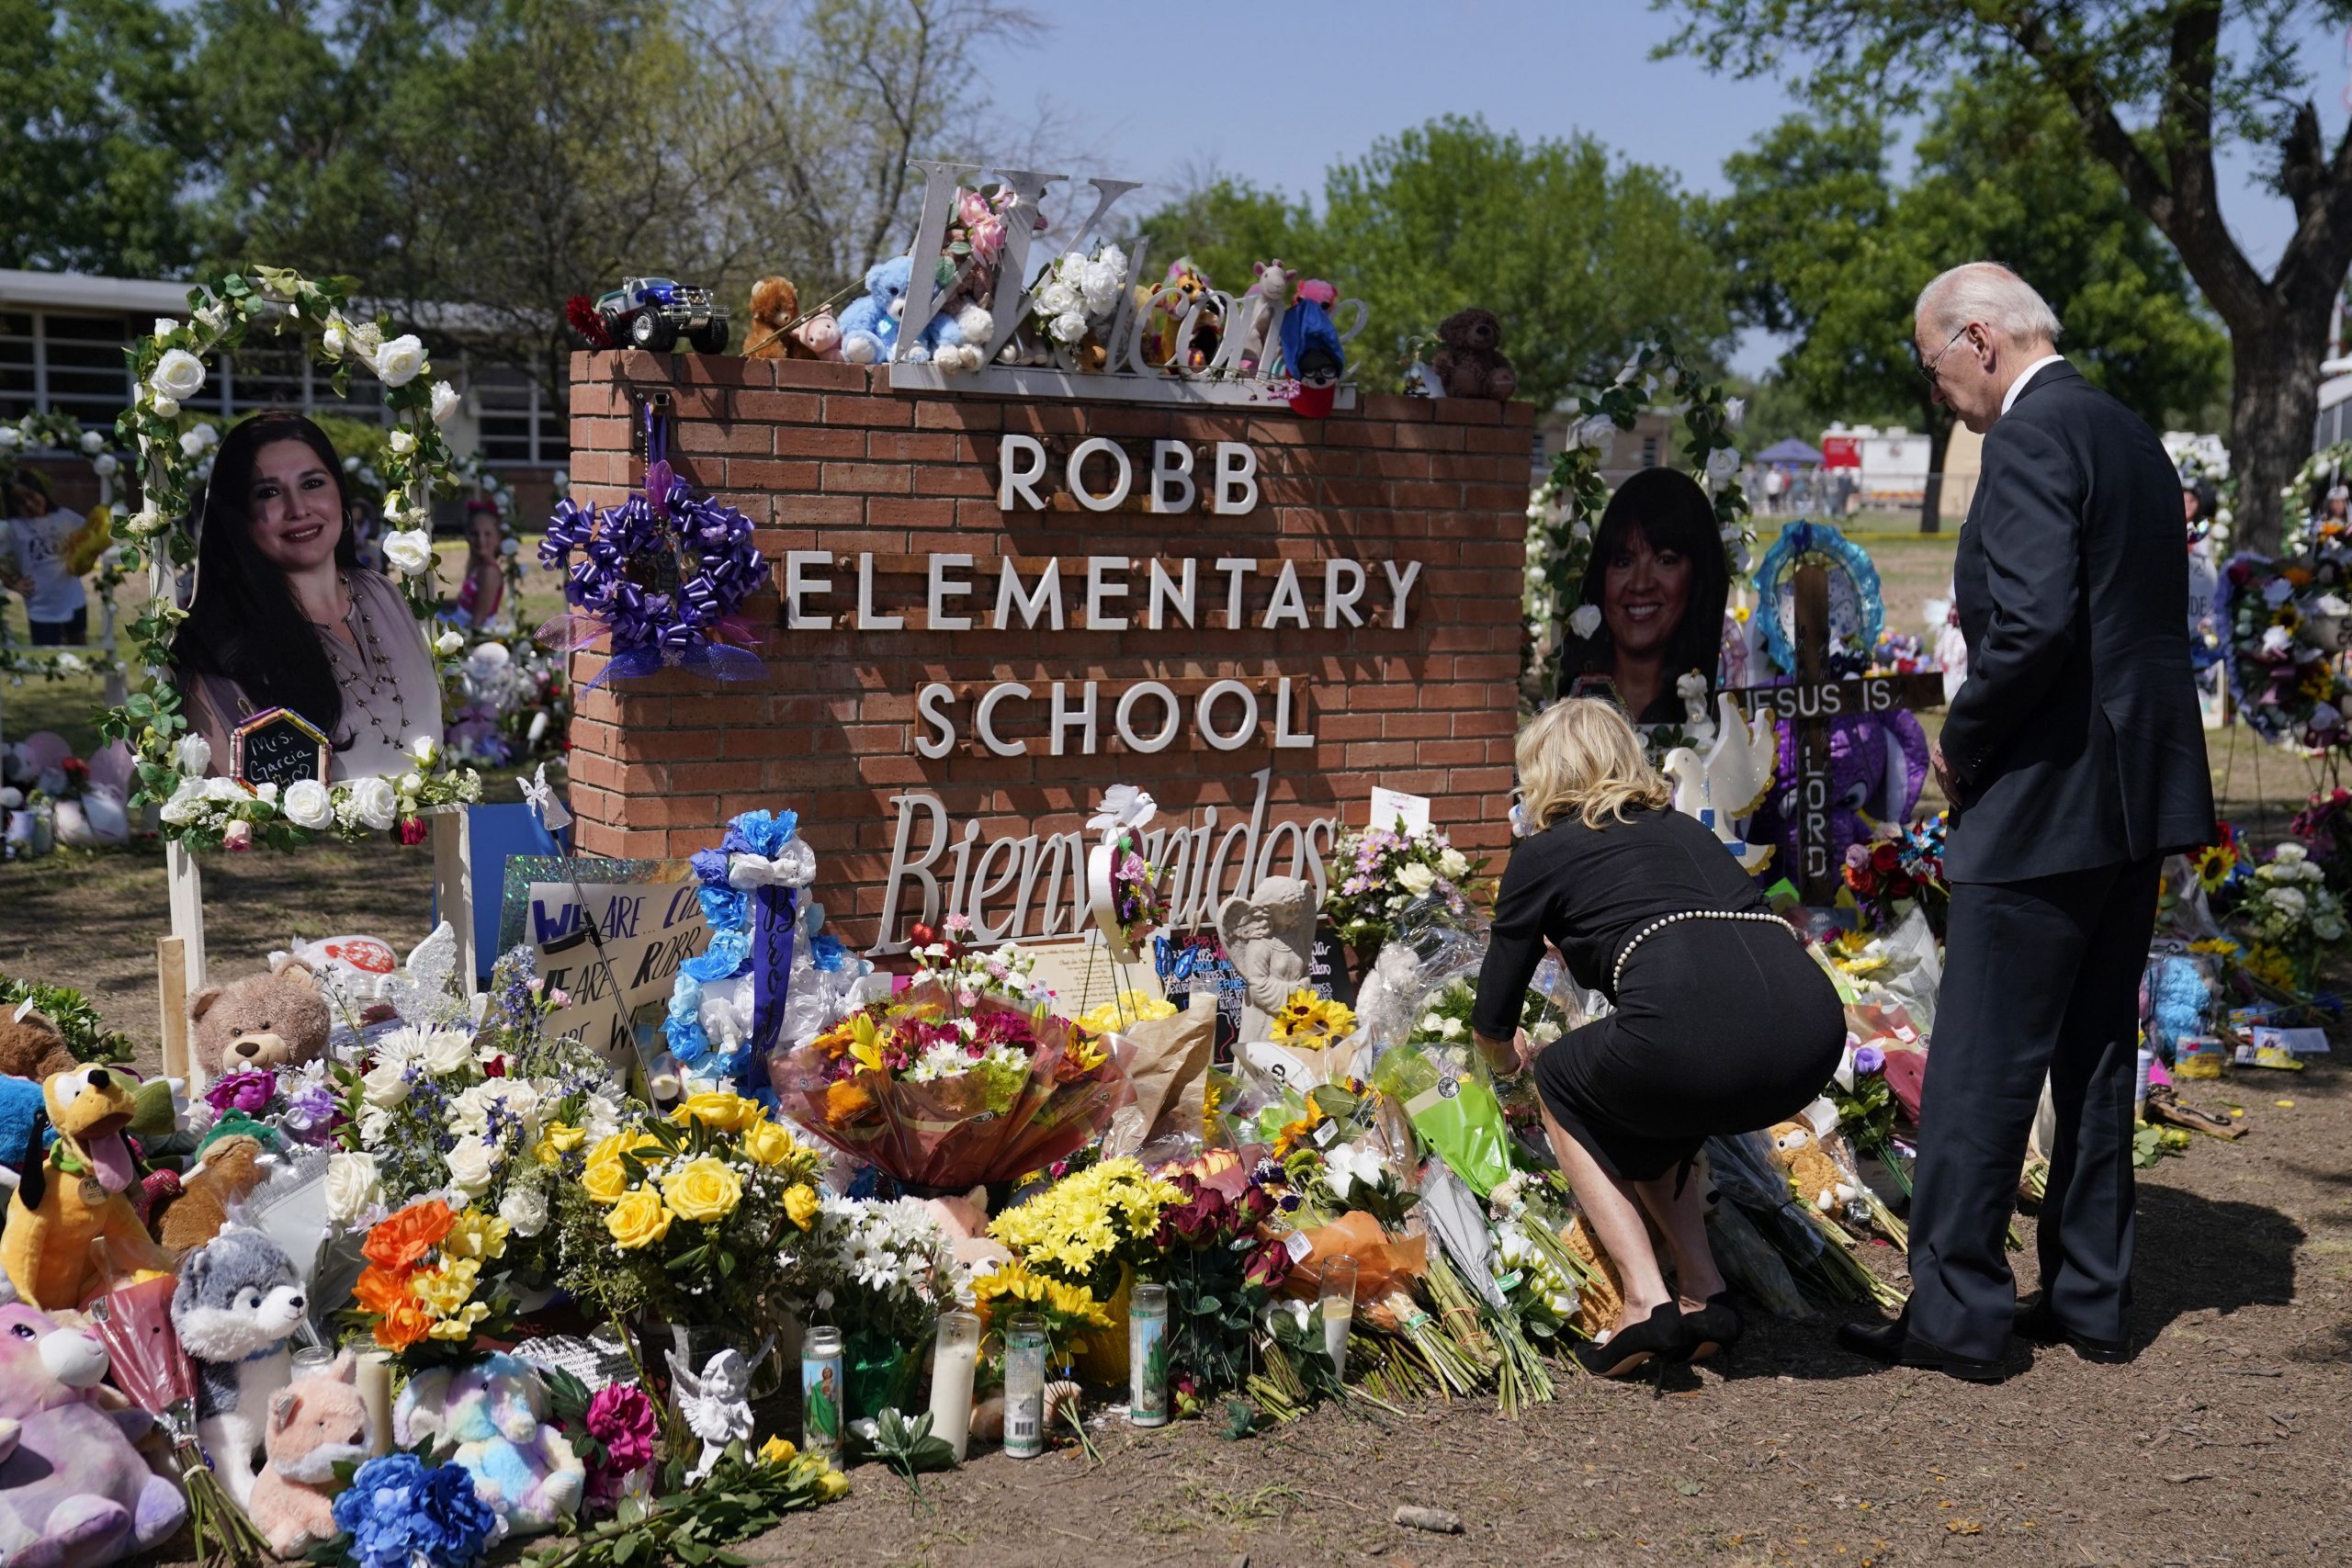 A father’s anguish outside Texas school while shooting unfolded